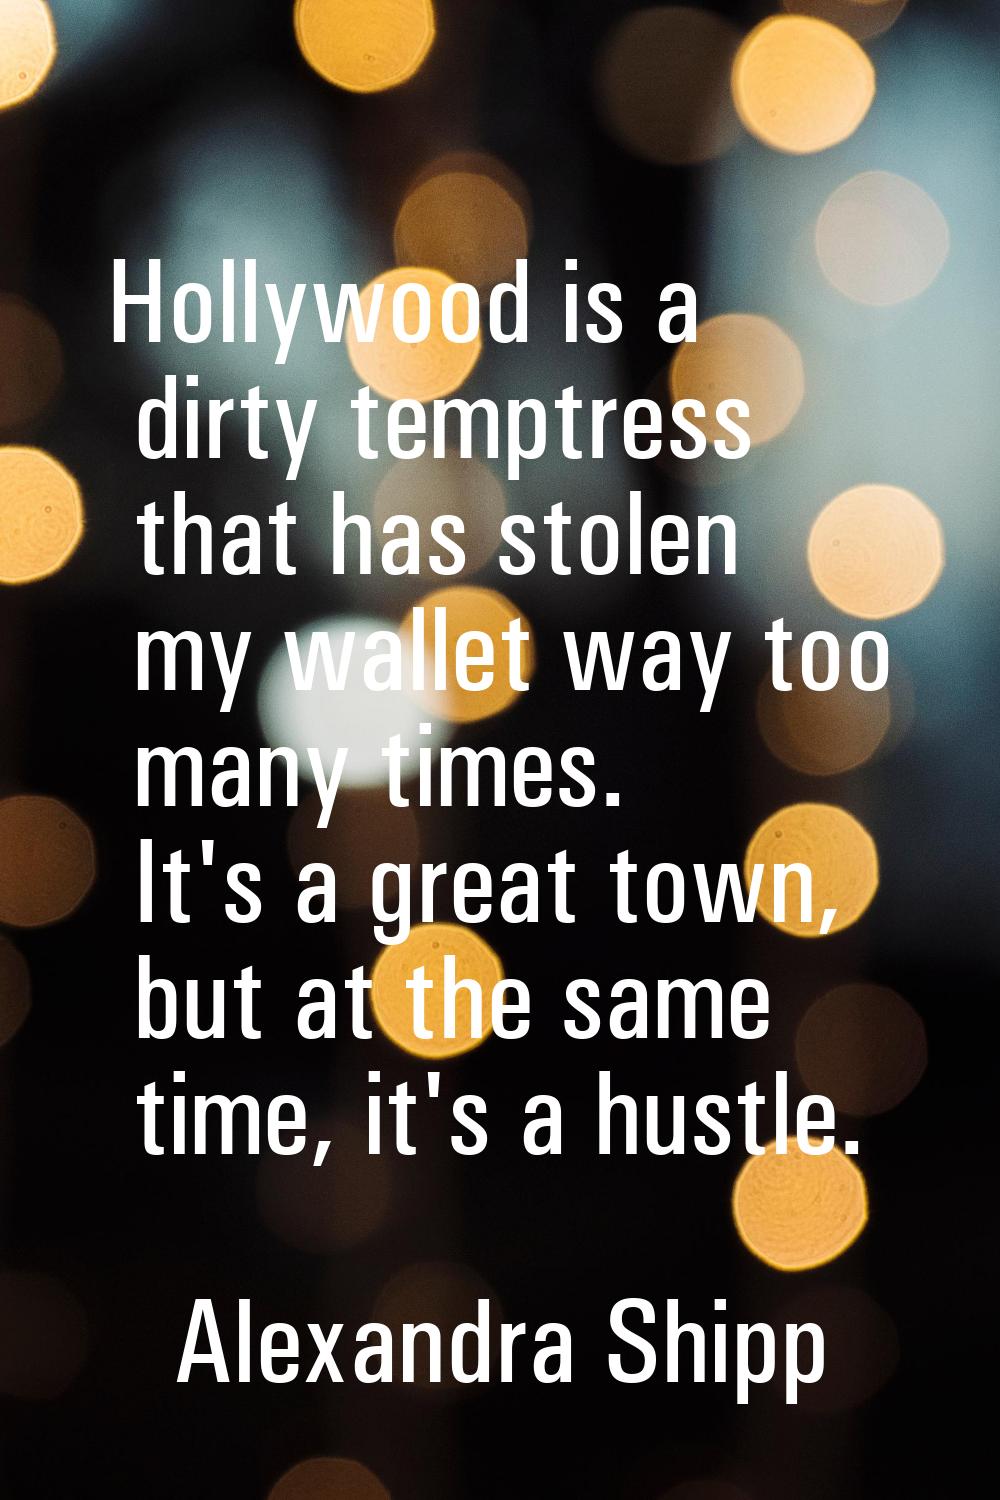 Hollywood is a dirty temptress that has stolen my wallet way too many times. It's a great town, but